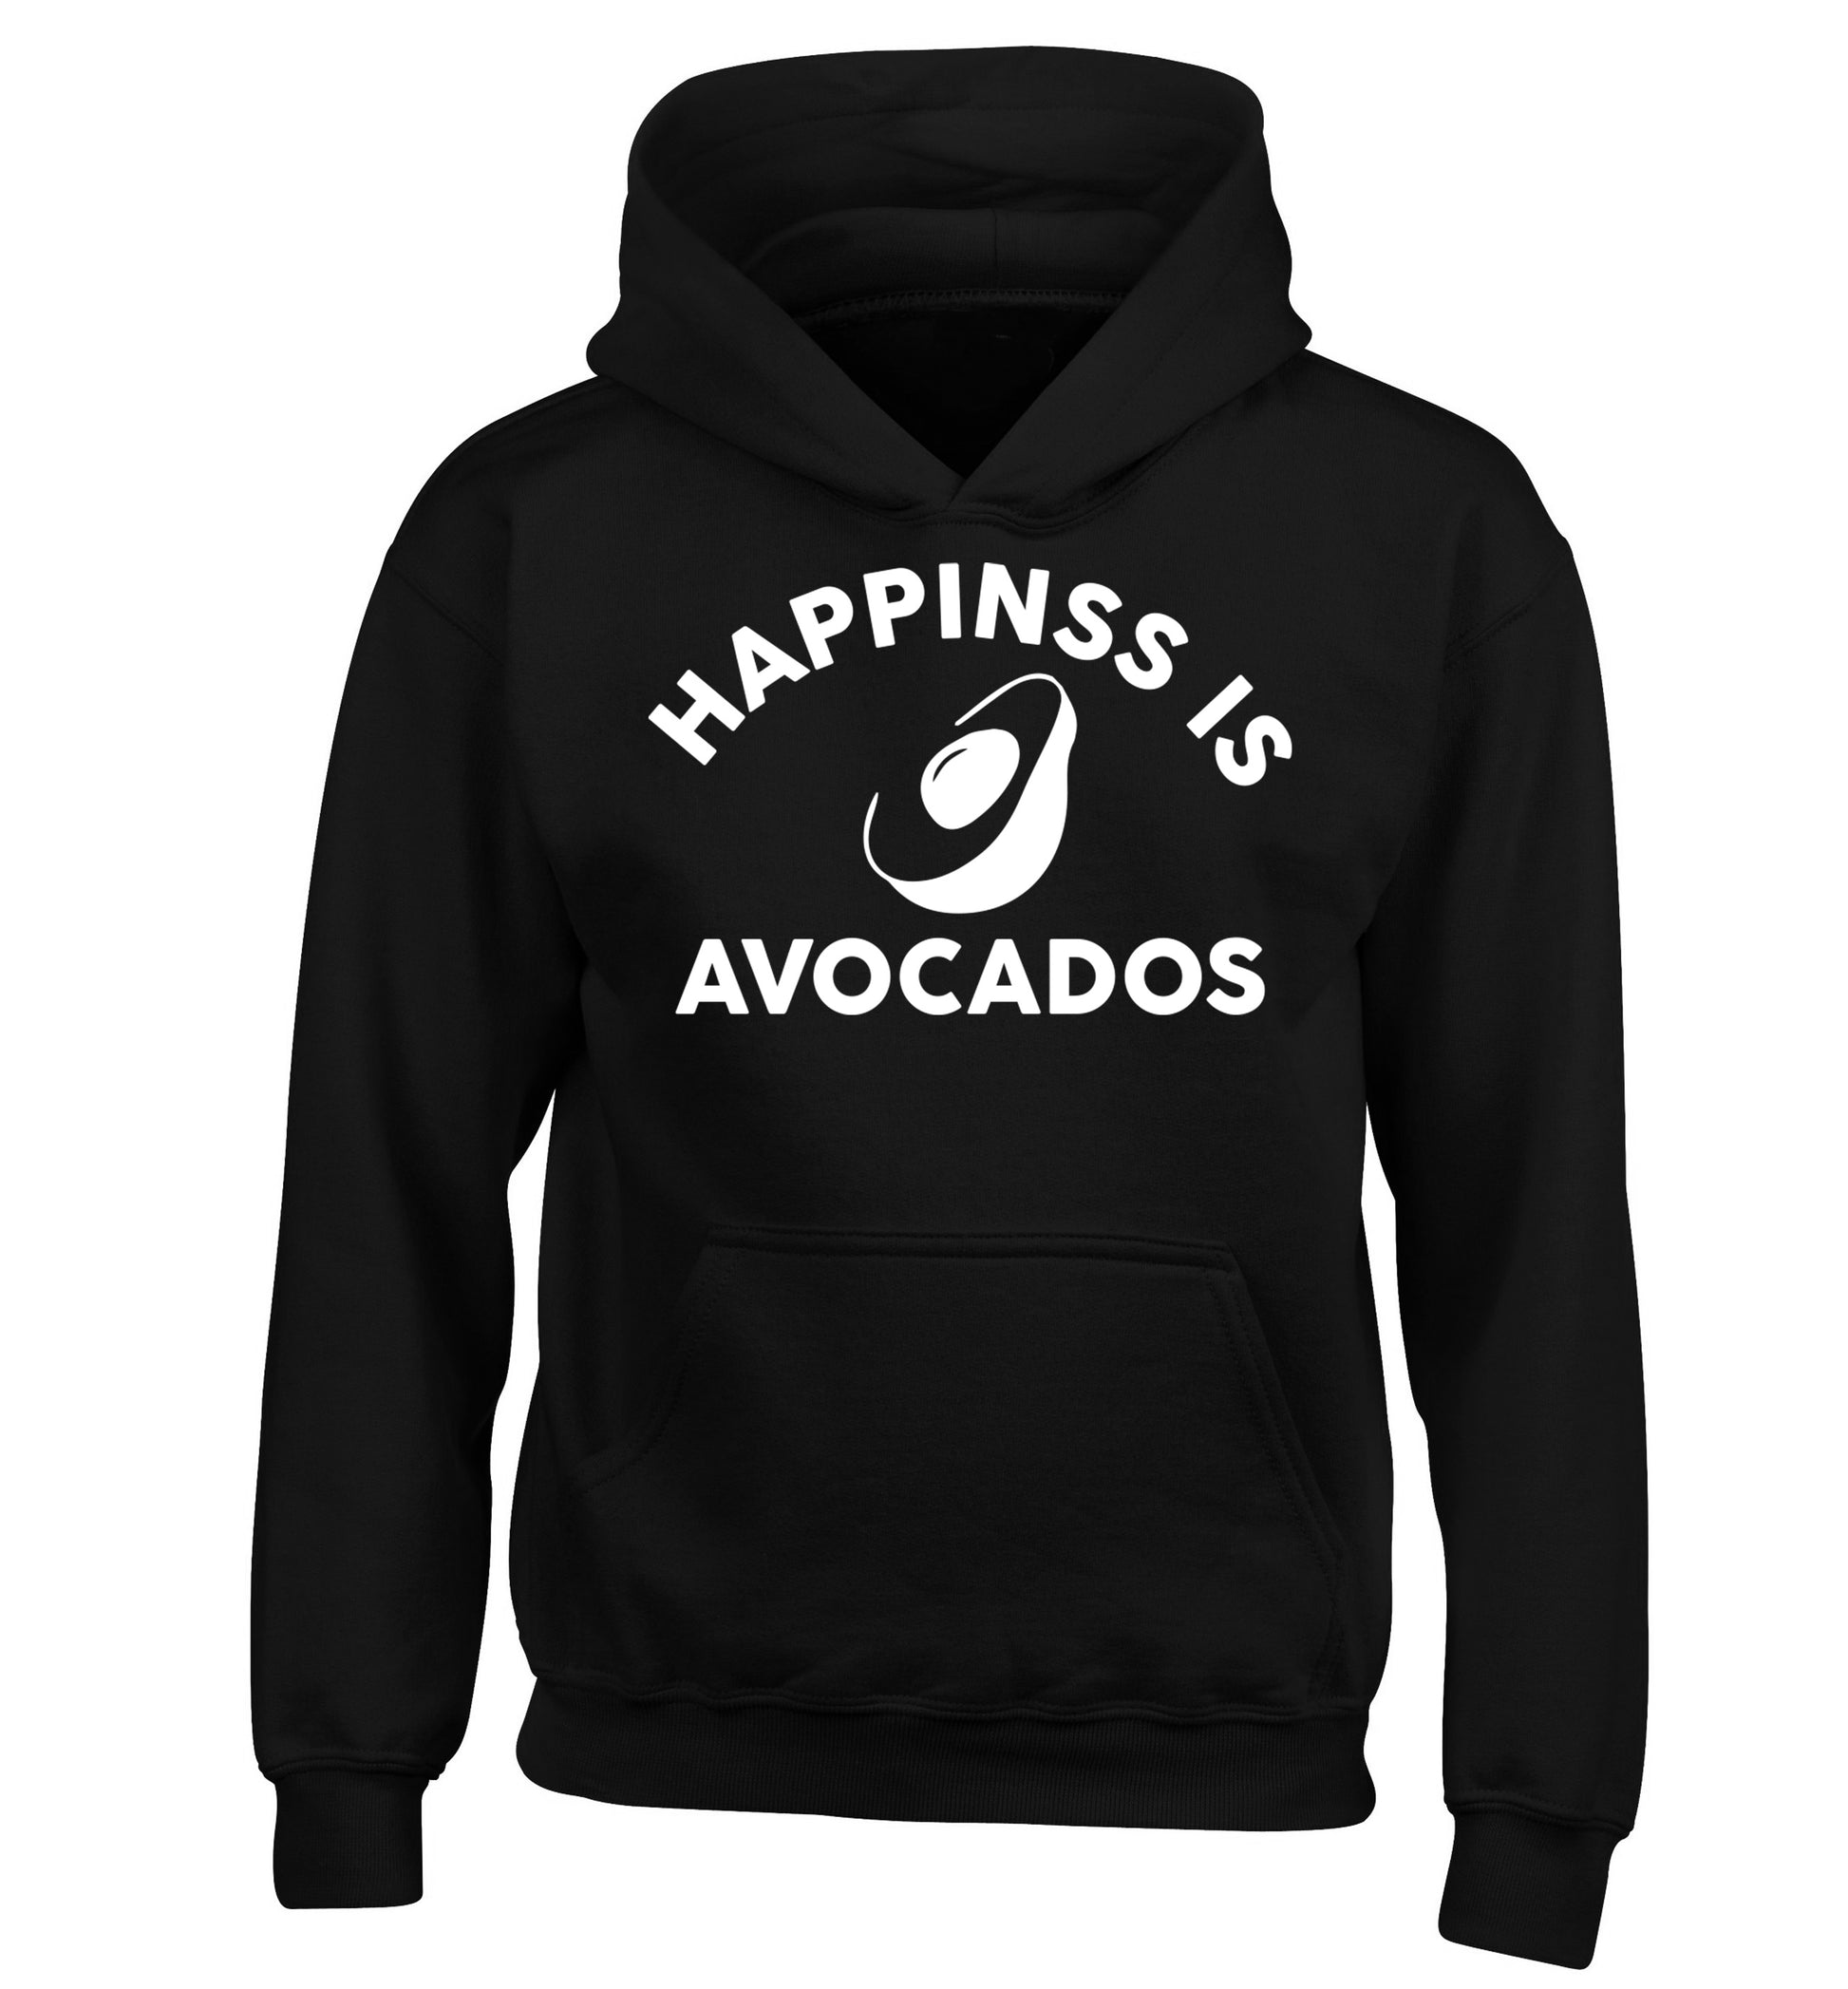 Happiness is avocados children's black hoodie 12-14 Years